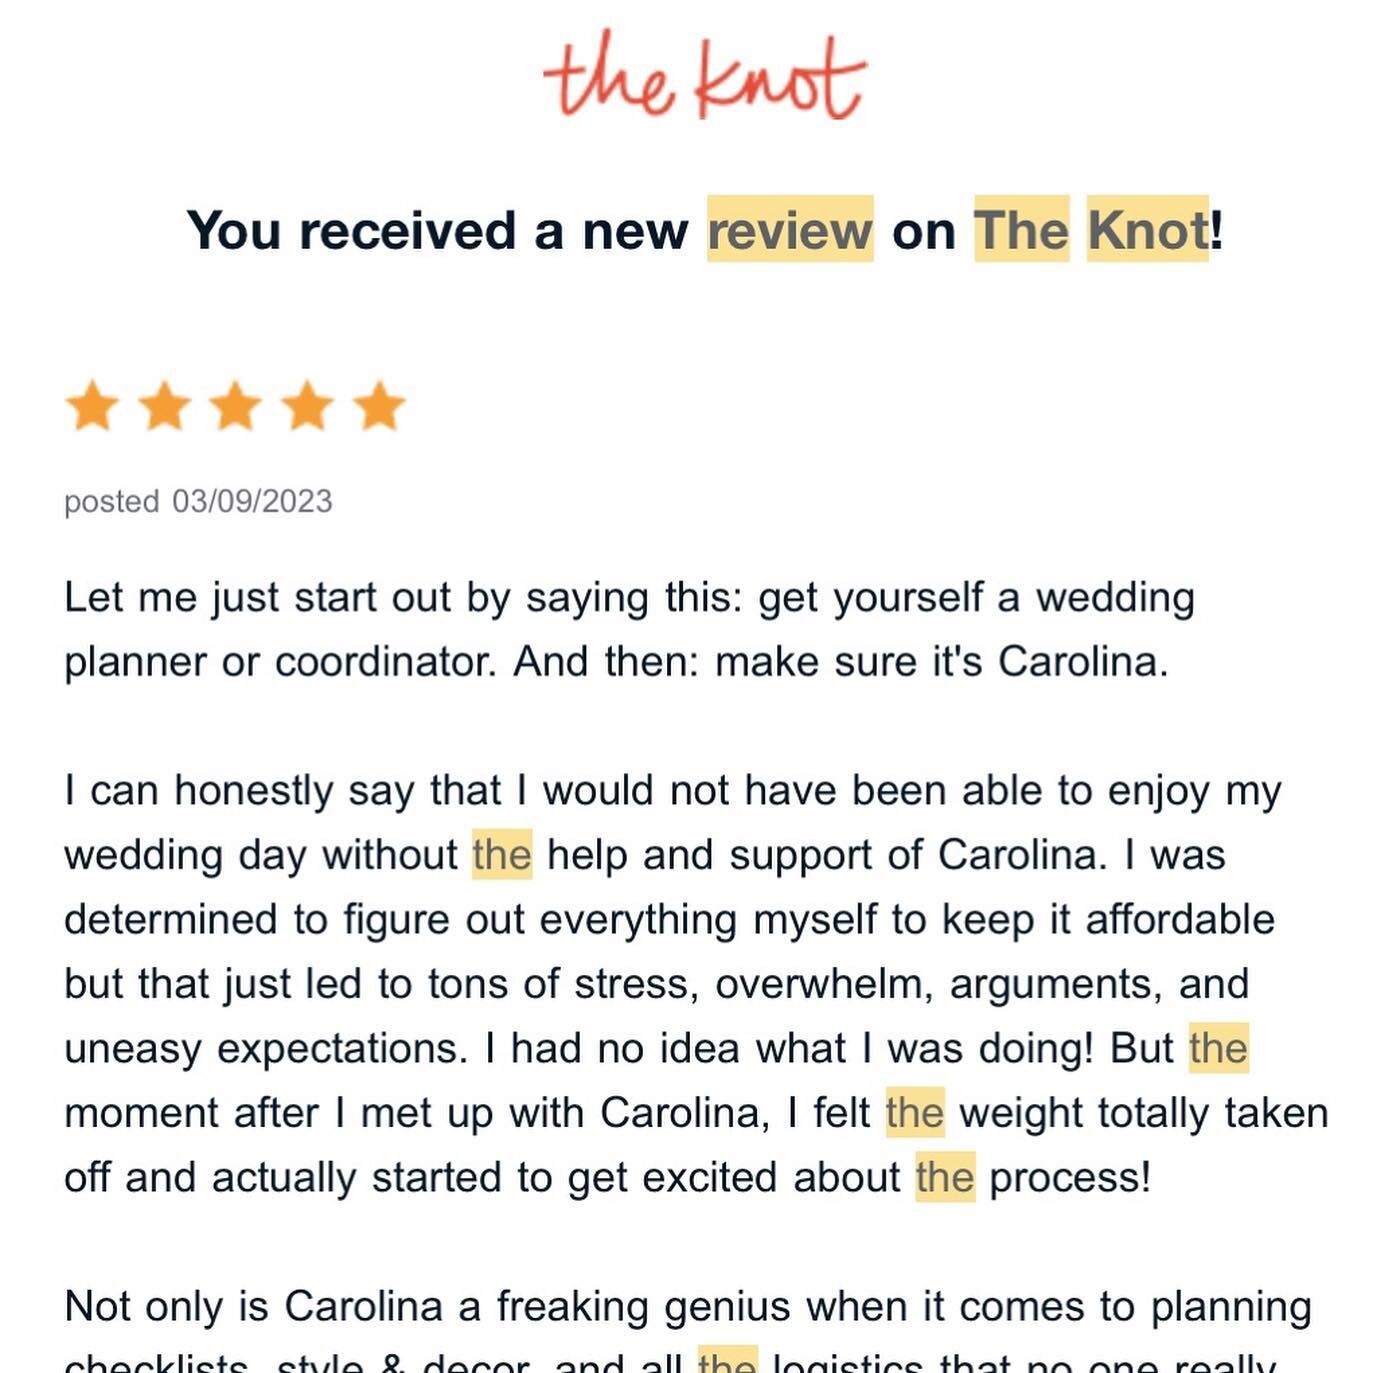 It&rsquo;s review time!!
Once in a while a pick a review from The Knot and share it here on my post, to give a chance for followers, who have not seen me at my Storefront at the Knot, to see what some of my lovely past clients have to say!

In honor 